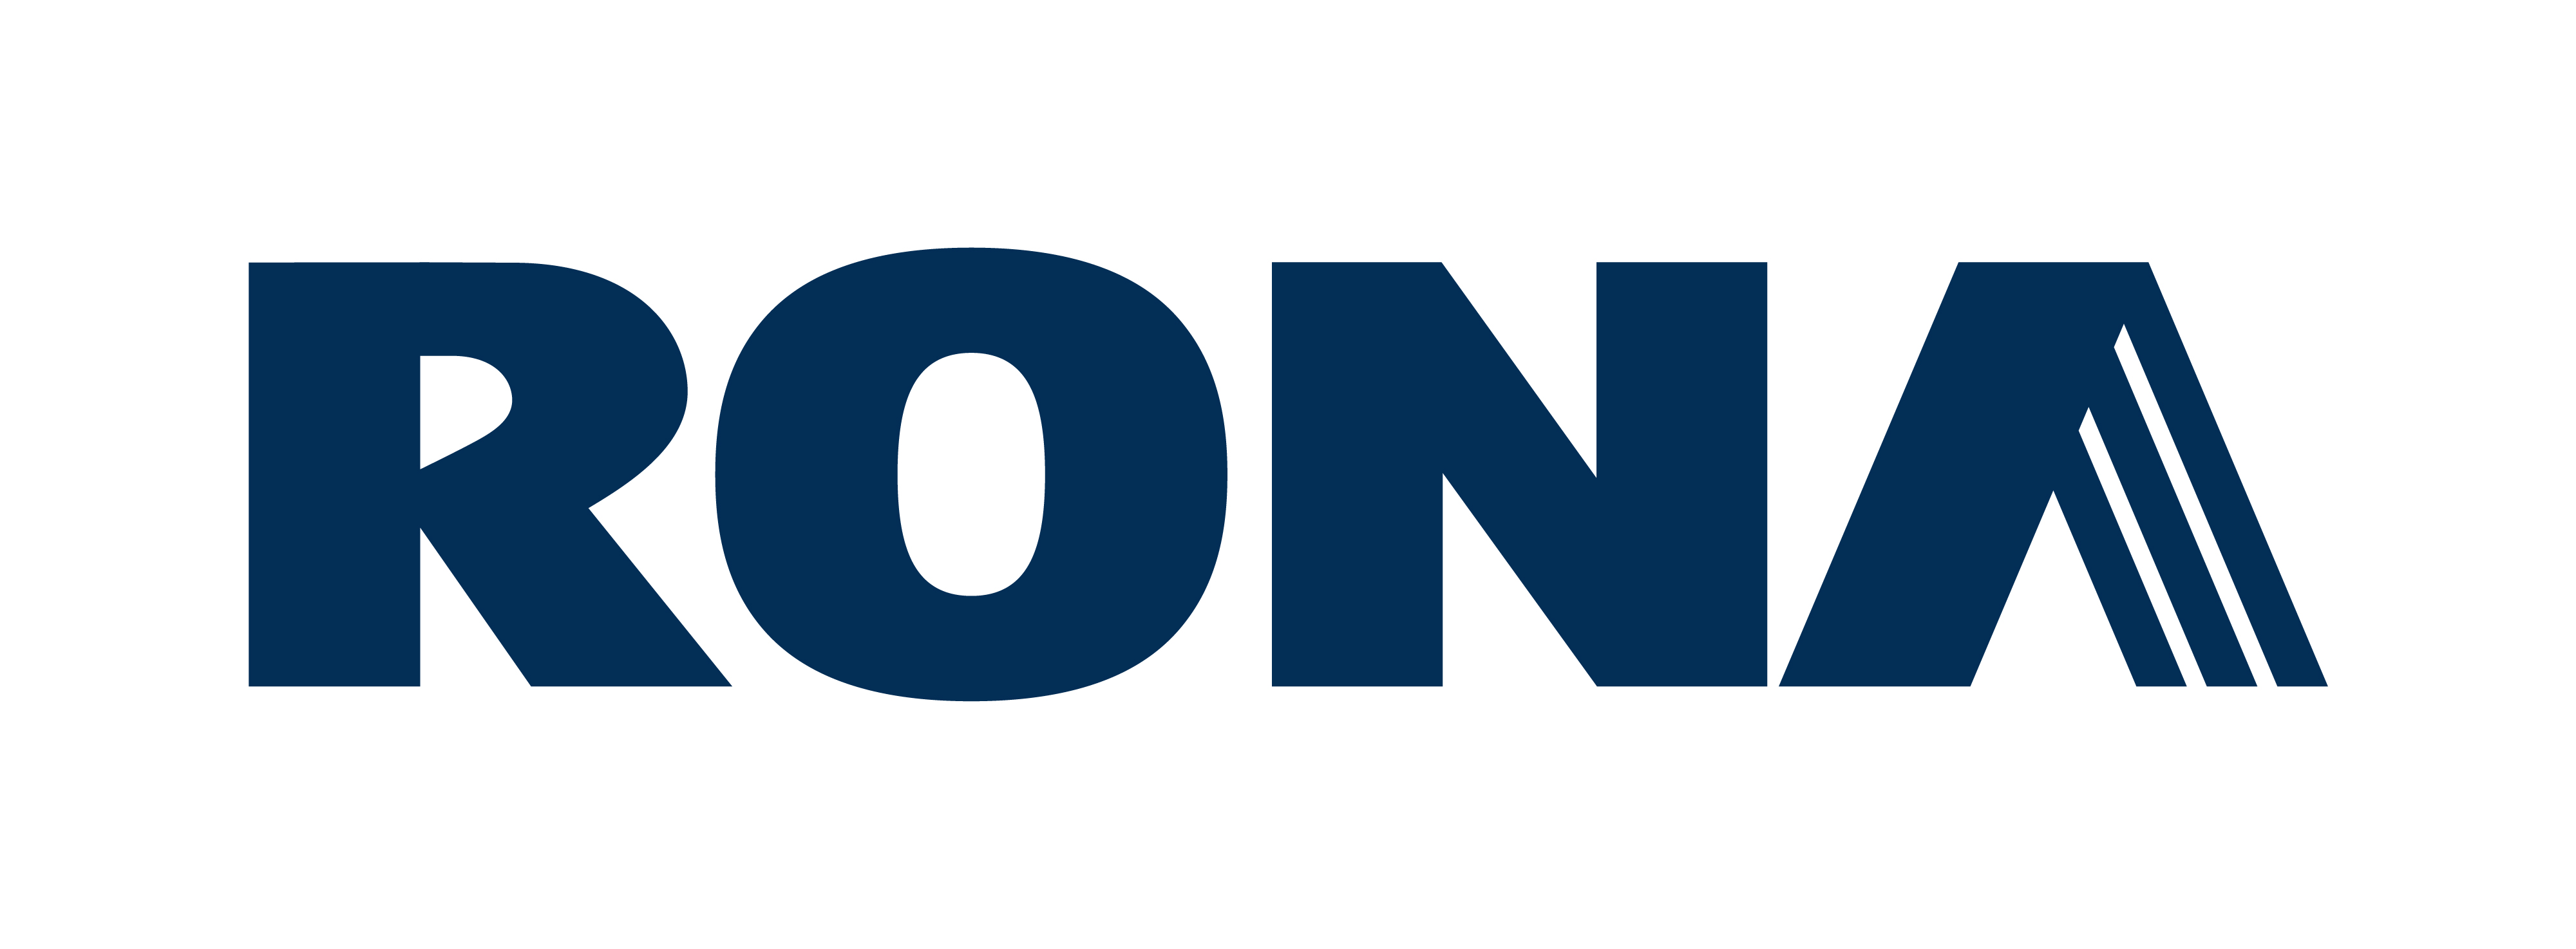 Lowe’s Canada adds to affiliated RONA dealer network in Ontario - Hardlines